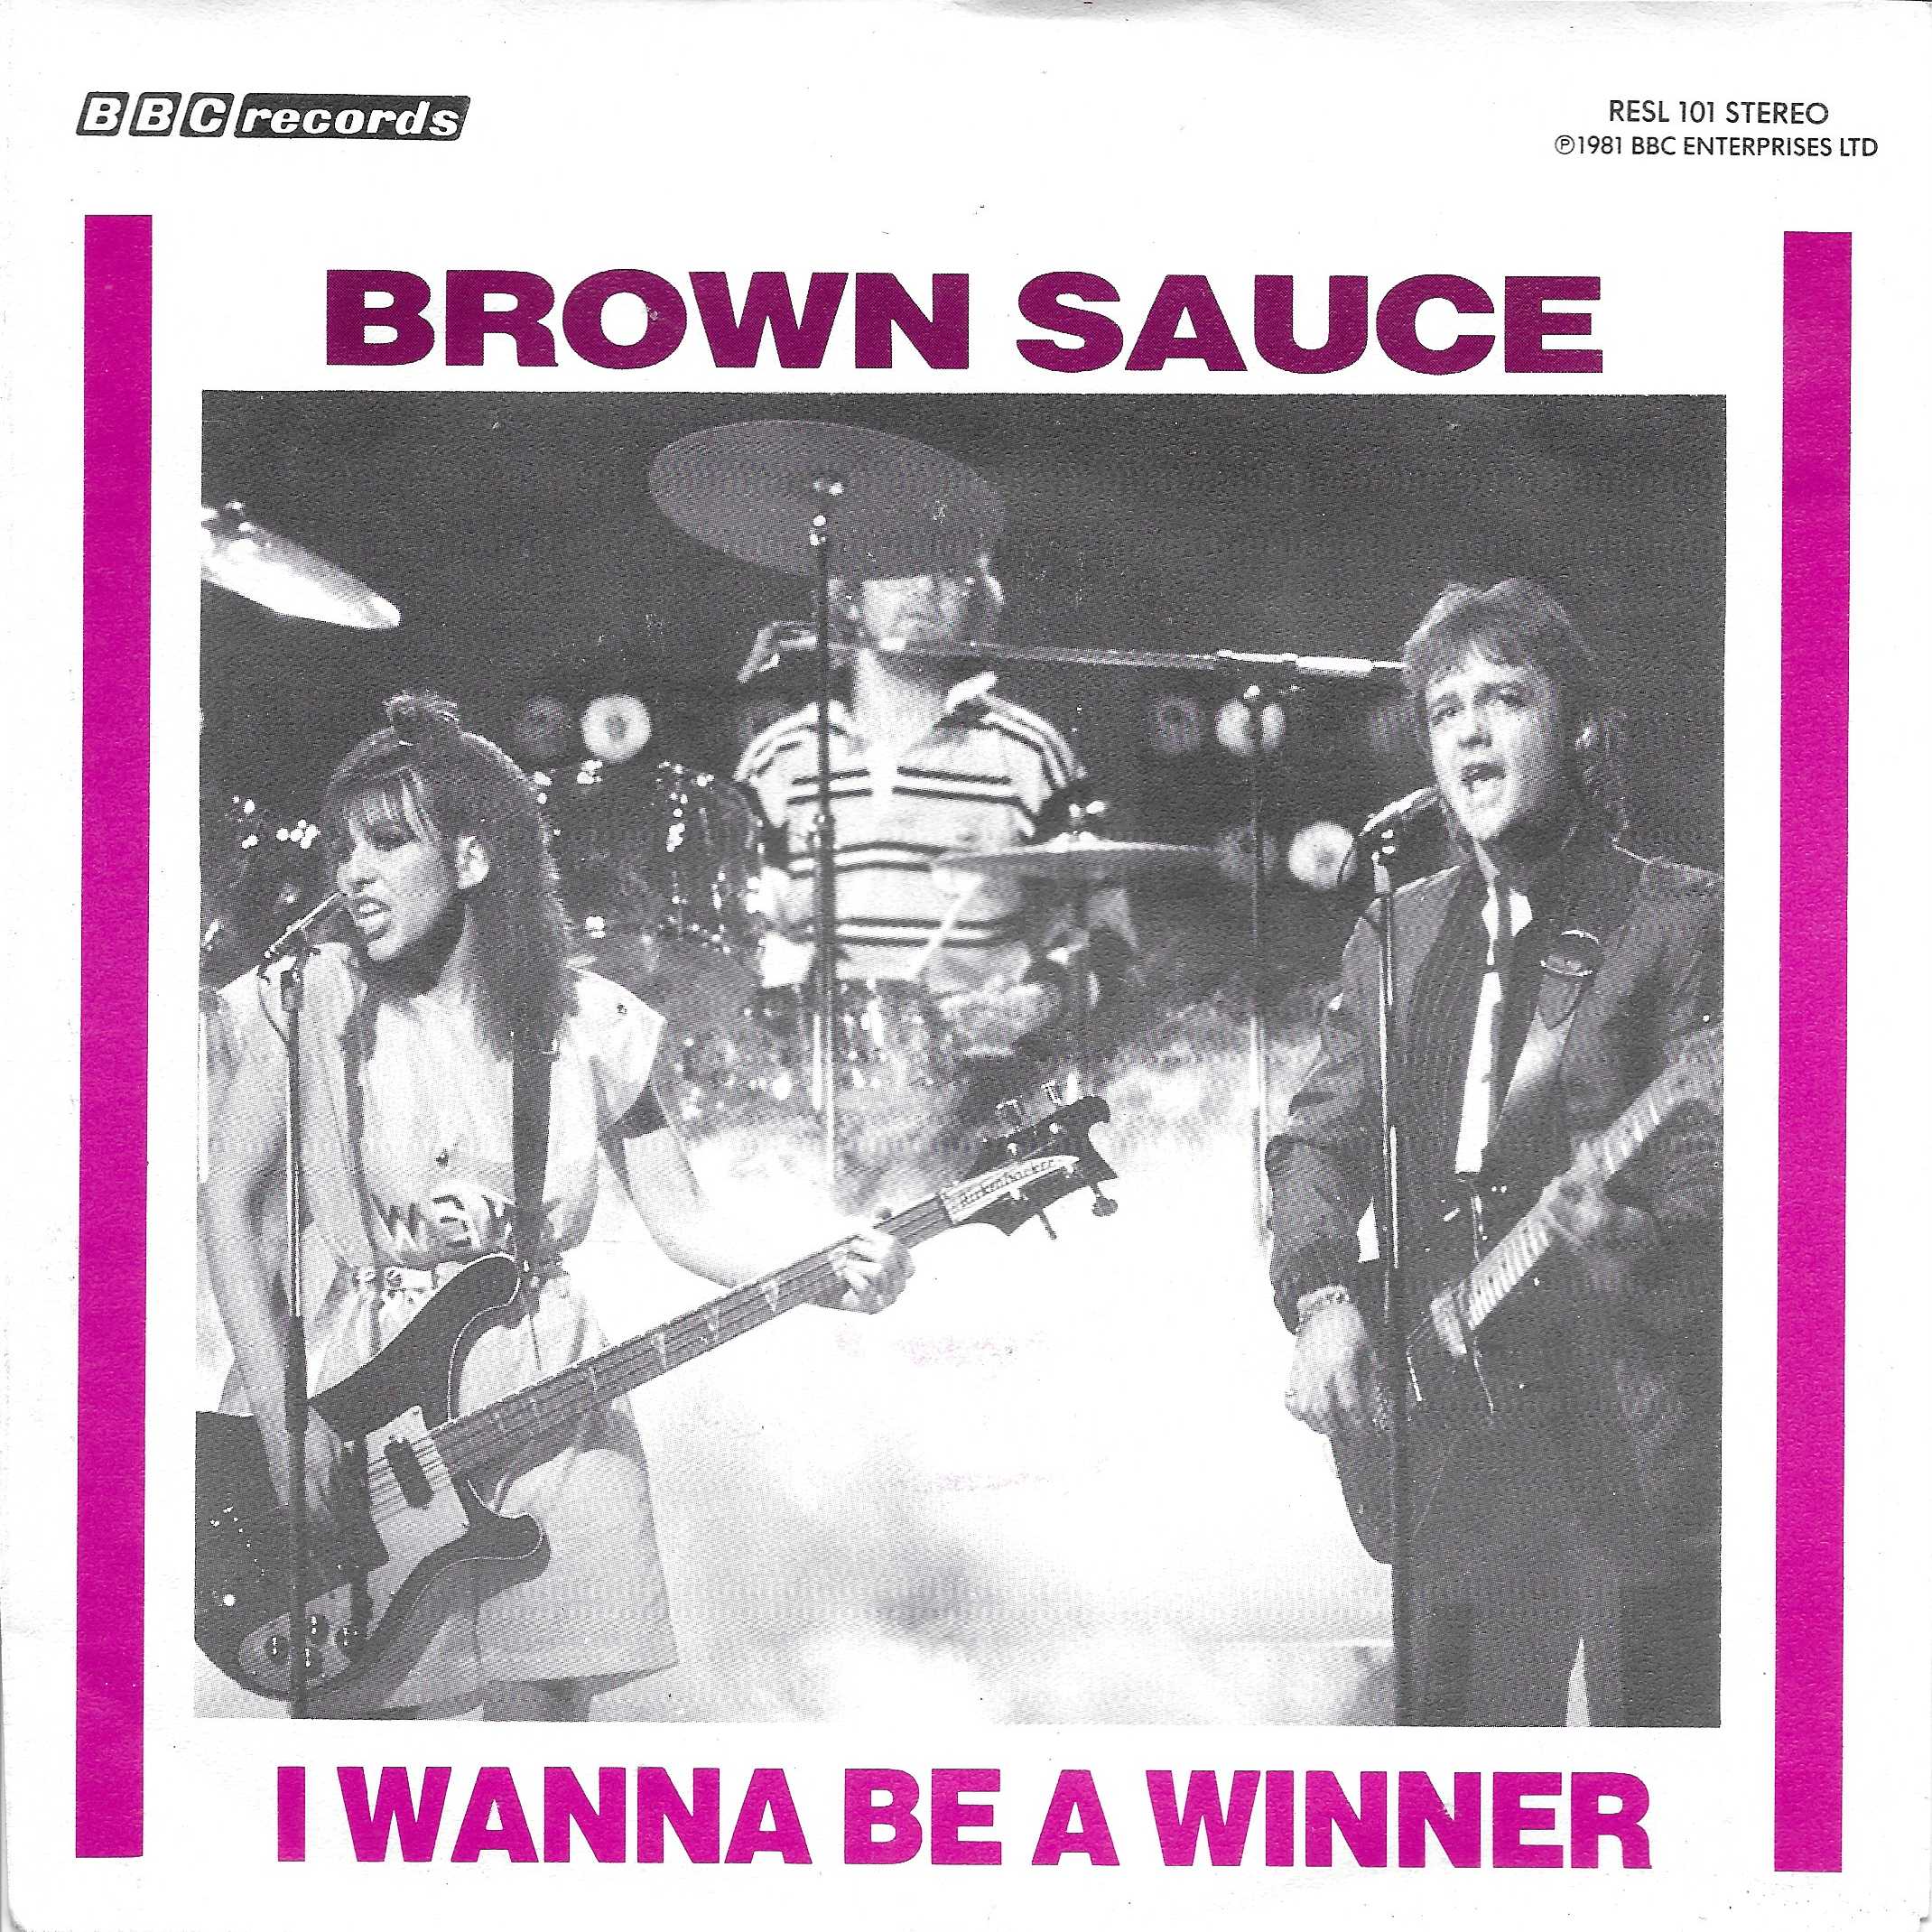 Picture of RESL 101-iD I wanna be a winner (Swap shop) (Dutch import) by artist B. A. Robertson from the BBC singles - Records and Tapes library